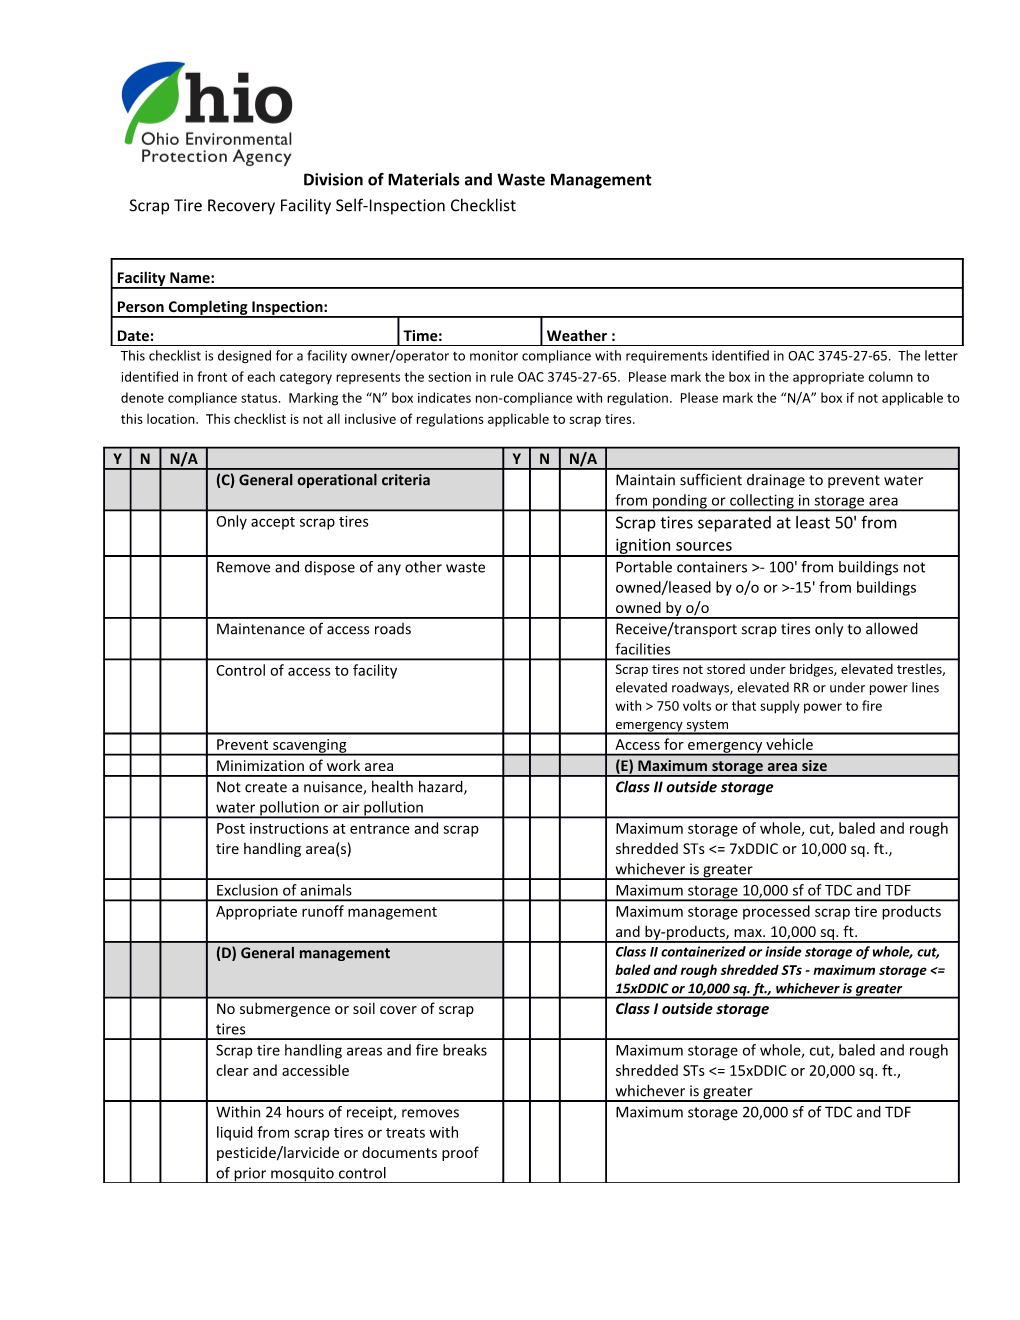 This Checklist Is Designed for a Facility Owner/Operator to Monitor Compliance with Requirements